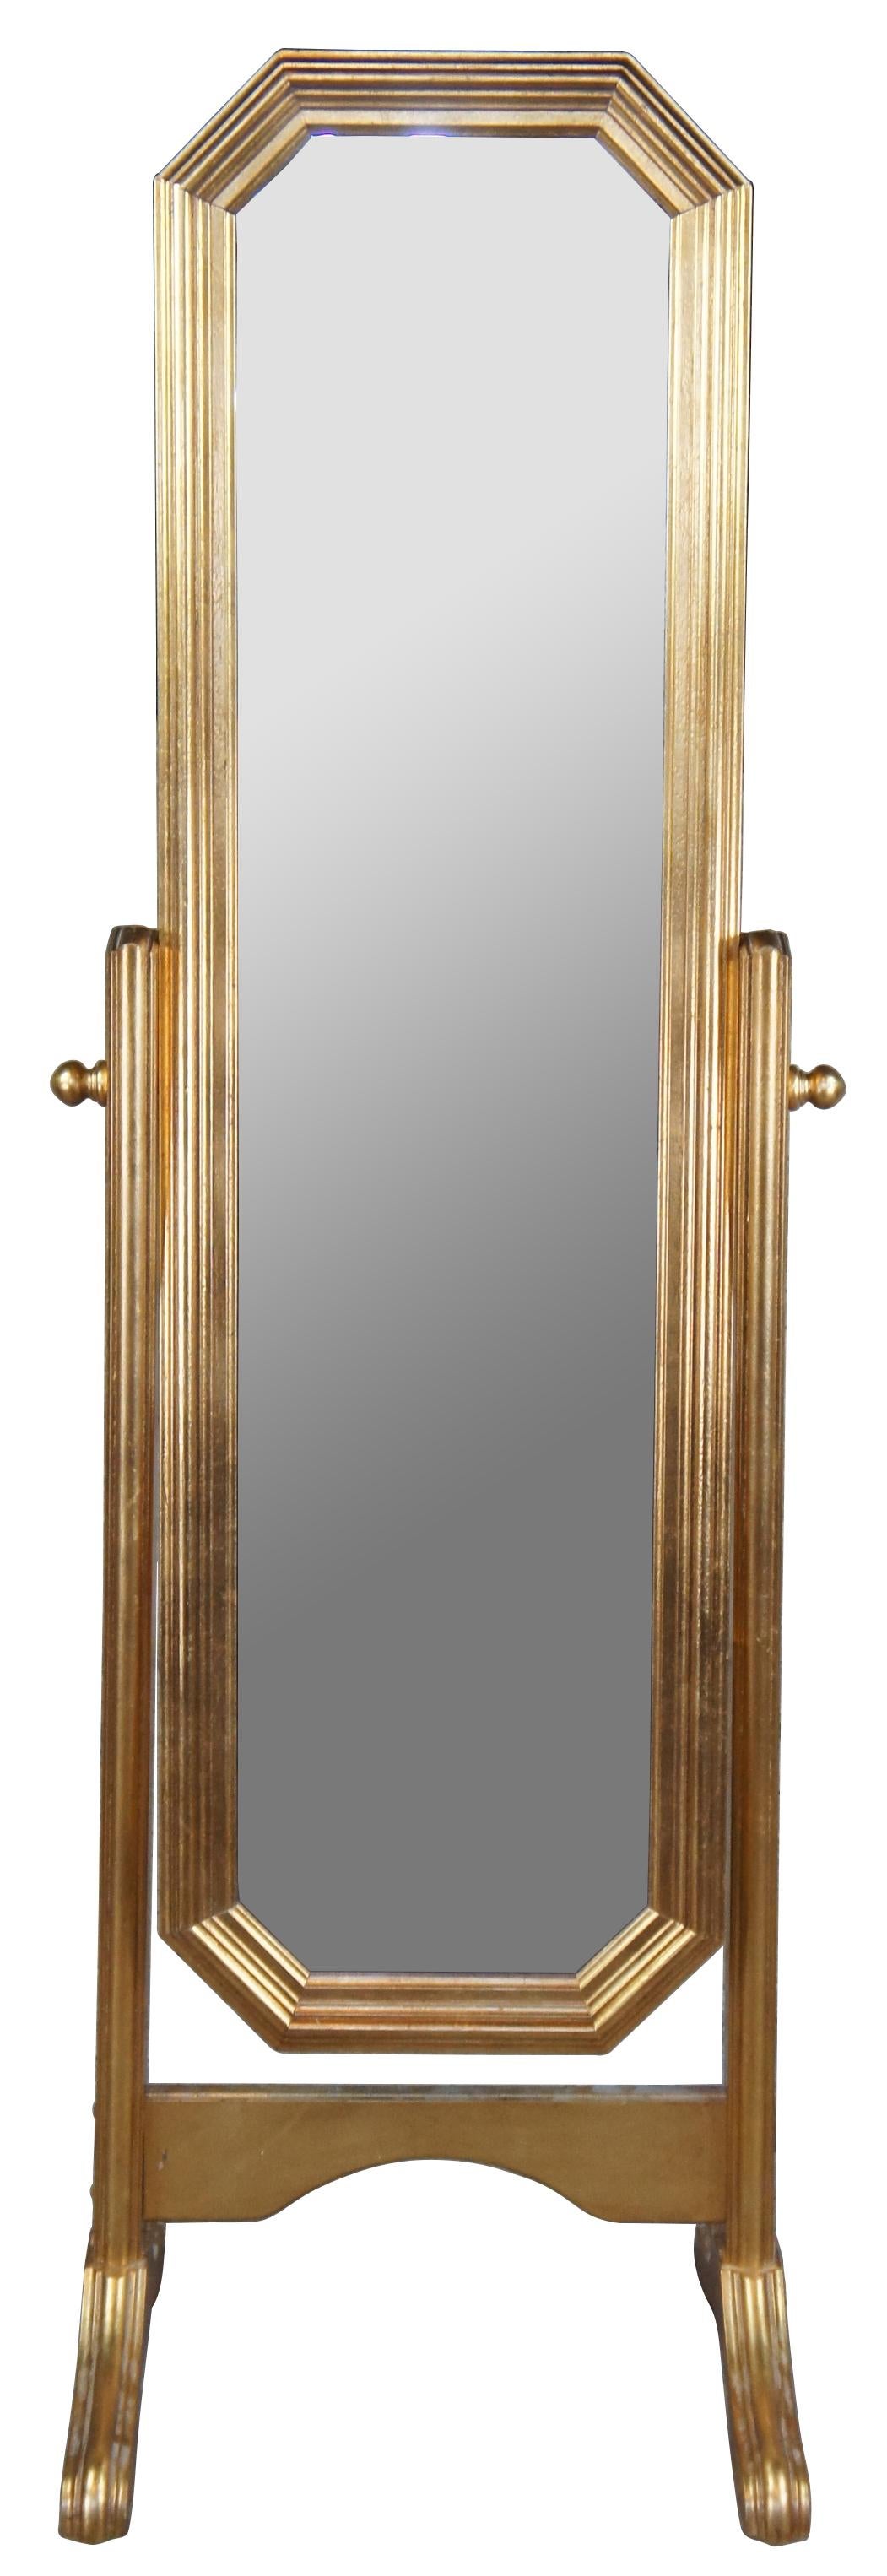 Mid Century Hollywood Regency freestanding bedroom dressing mirror. Elongated octagon form featuring a beveled mirror with gold gilt frame and adjustable angle base. Marked F. Made in Italy.

Measures: 19